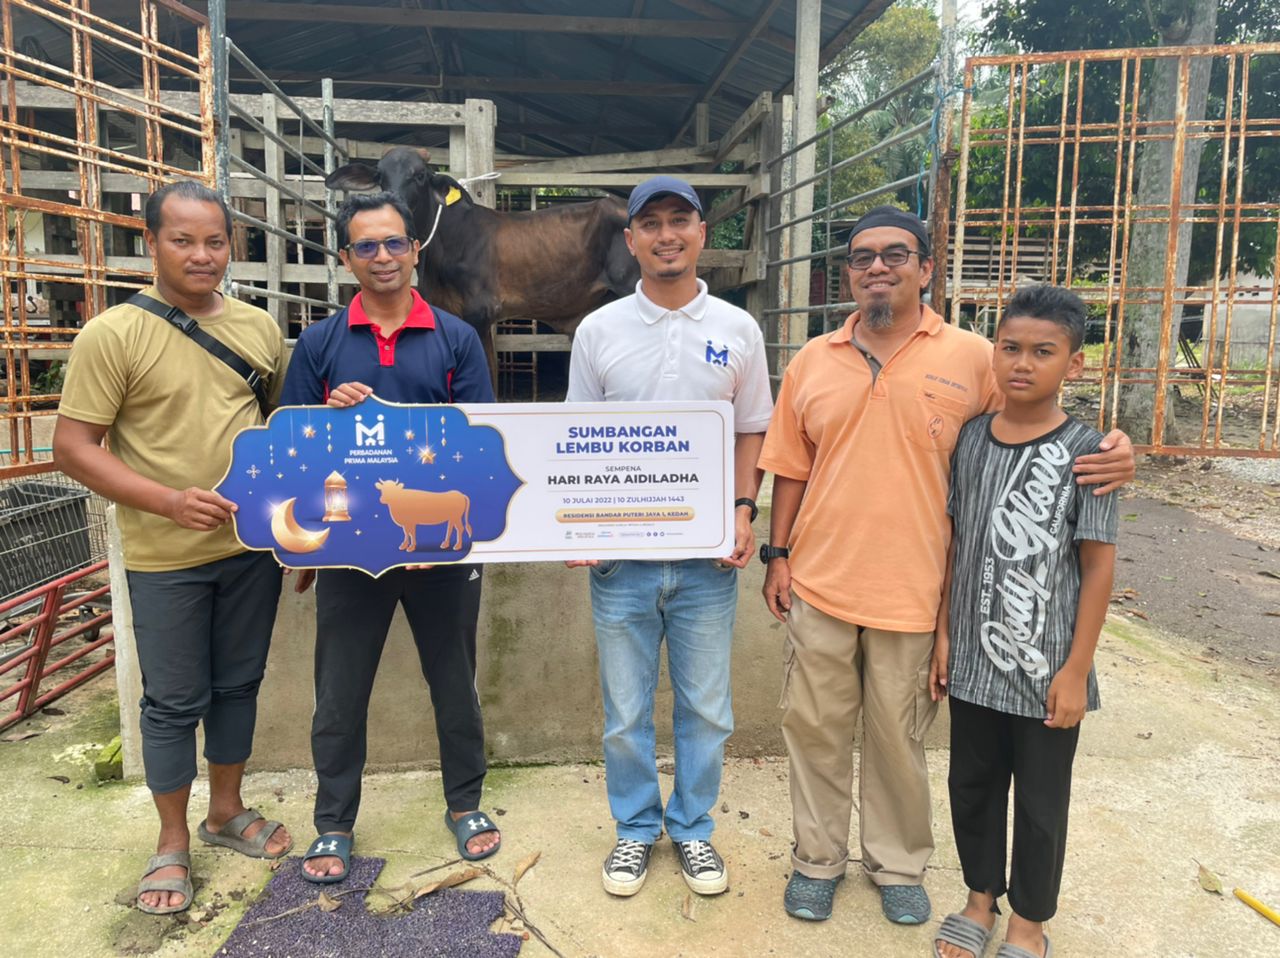 Cover image of Community Past Program: Qurban Programme – Contribution and sponsorships of cows which in line with the #PR1MAKita Aspiration at Residensi Bandar Puteri Jaya 1, Kedah.